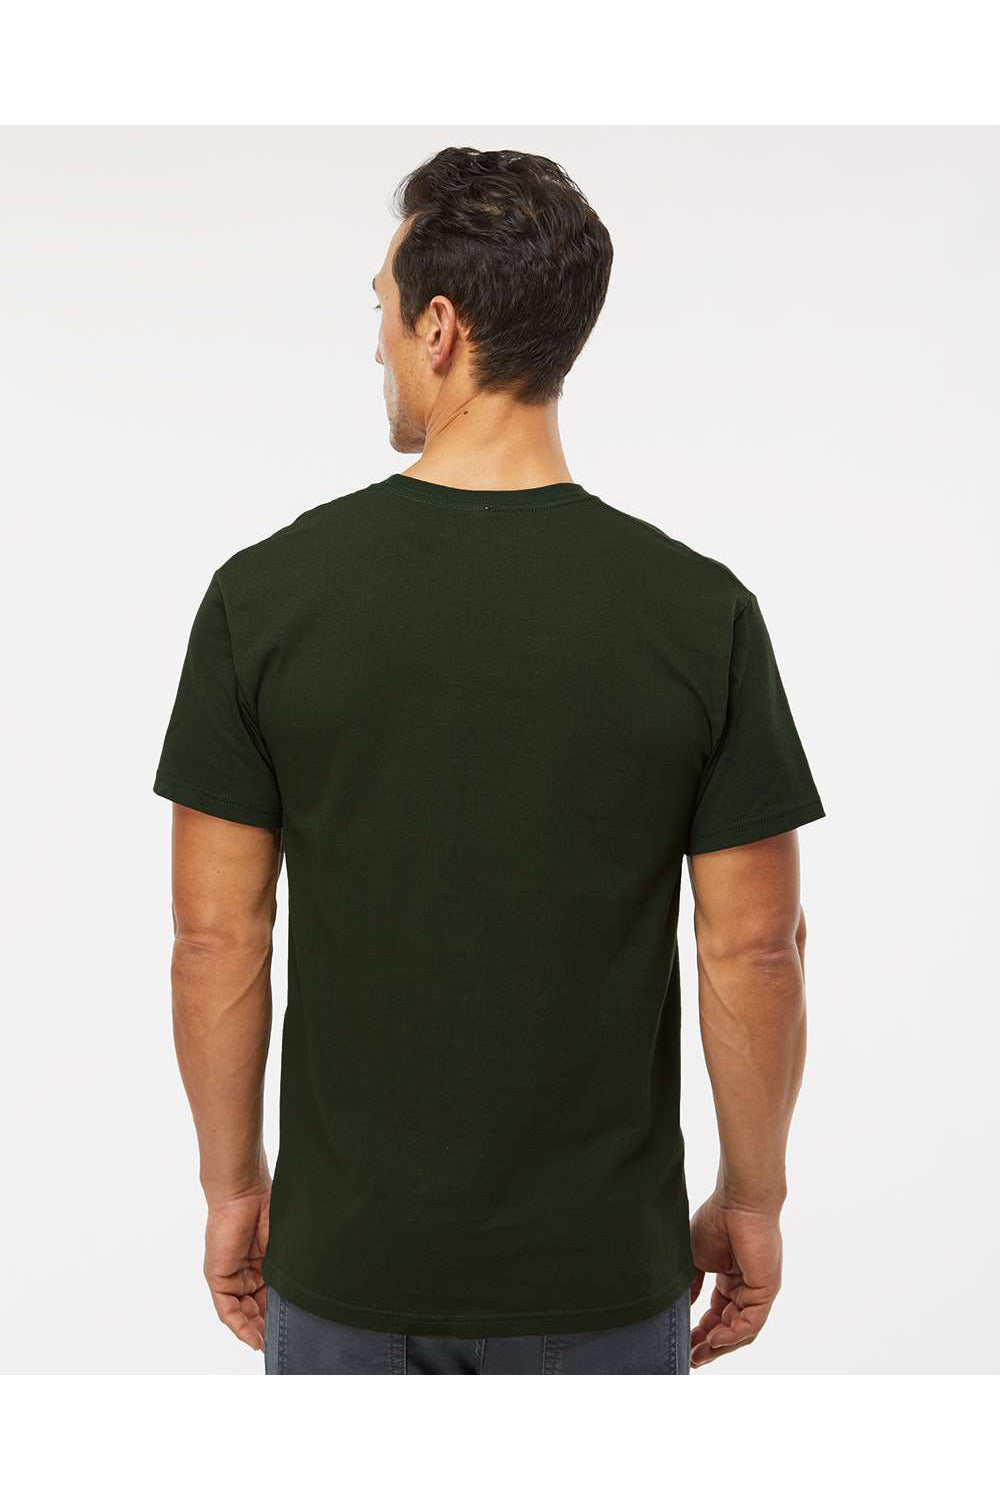 M&O 4800 Mens Gold Soft Touch Short Sleeve Crewneck T-Shirt Forest Green Model Back